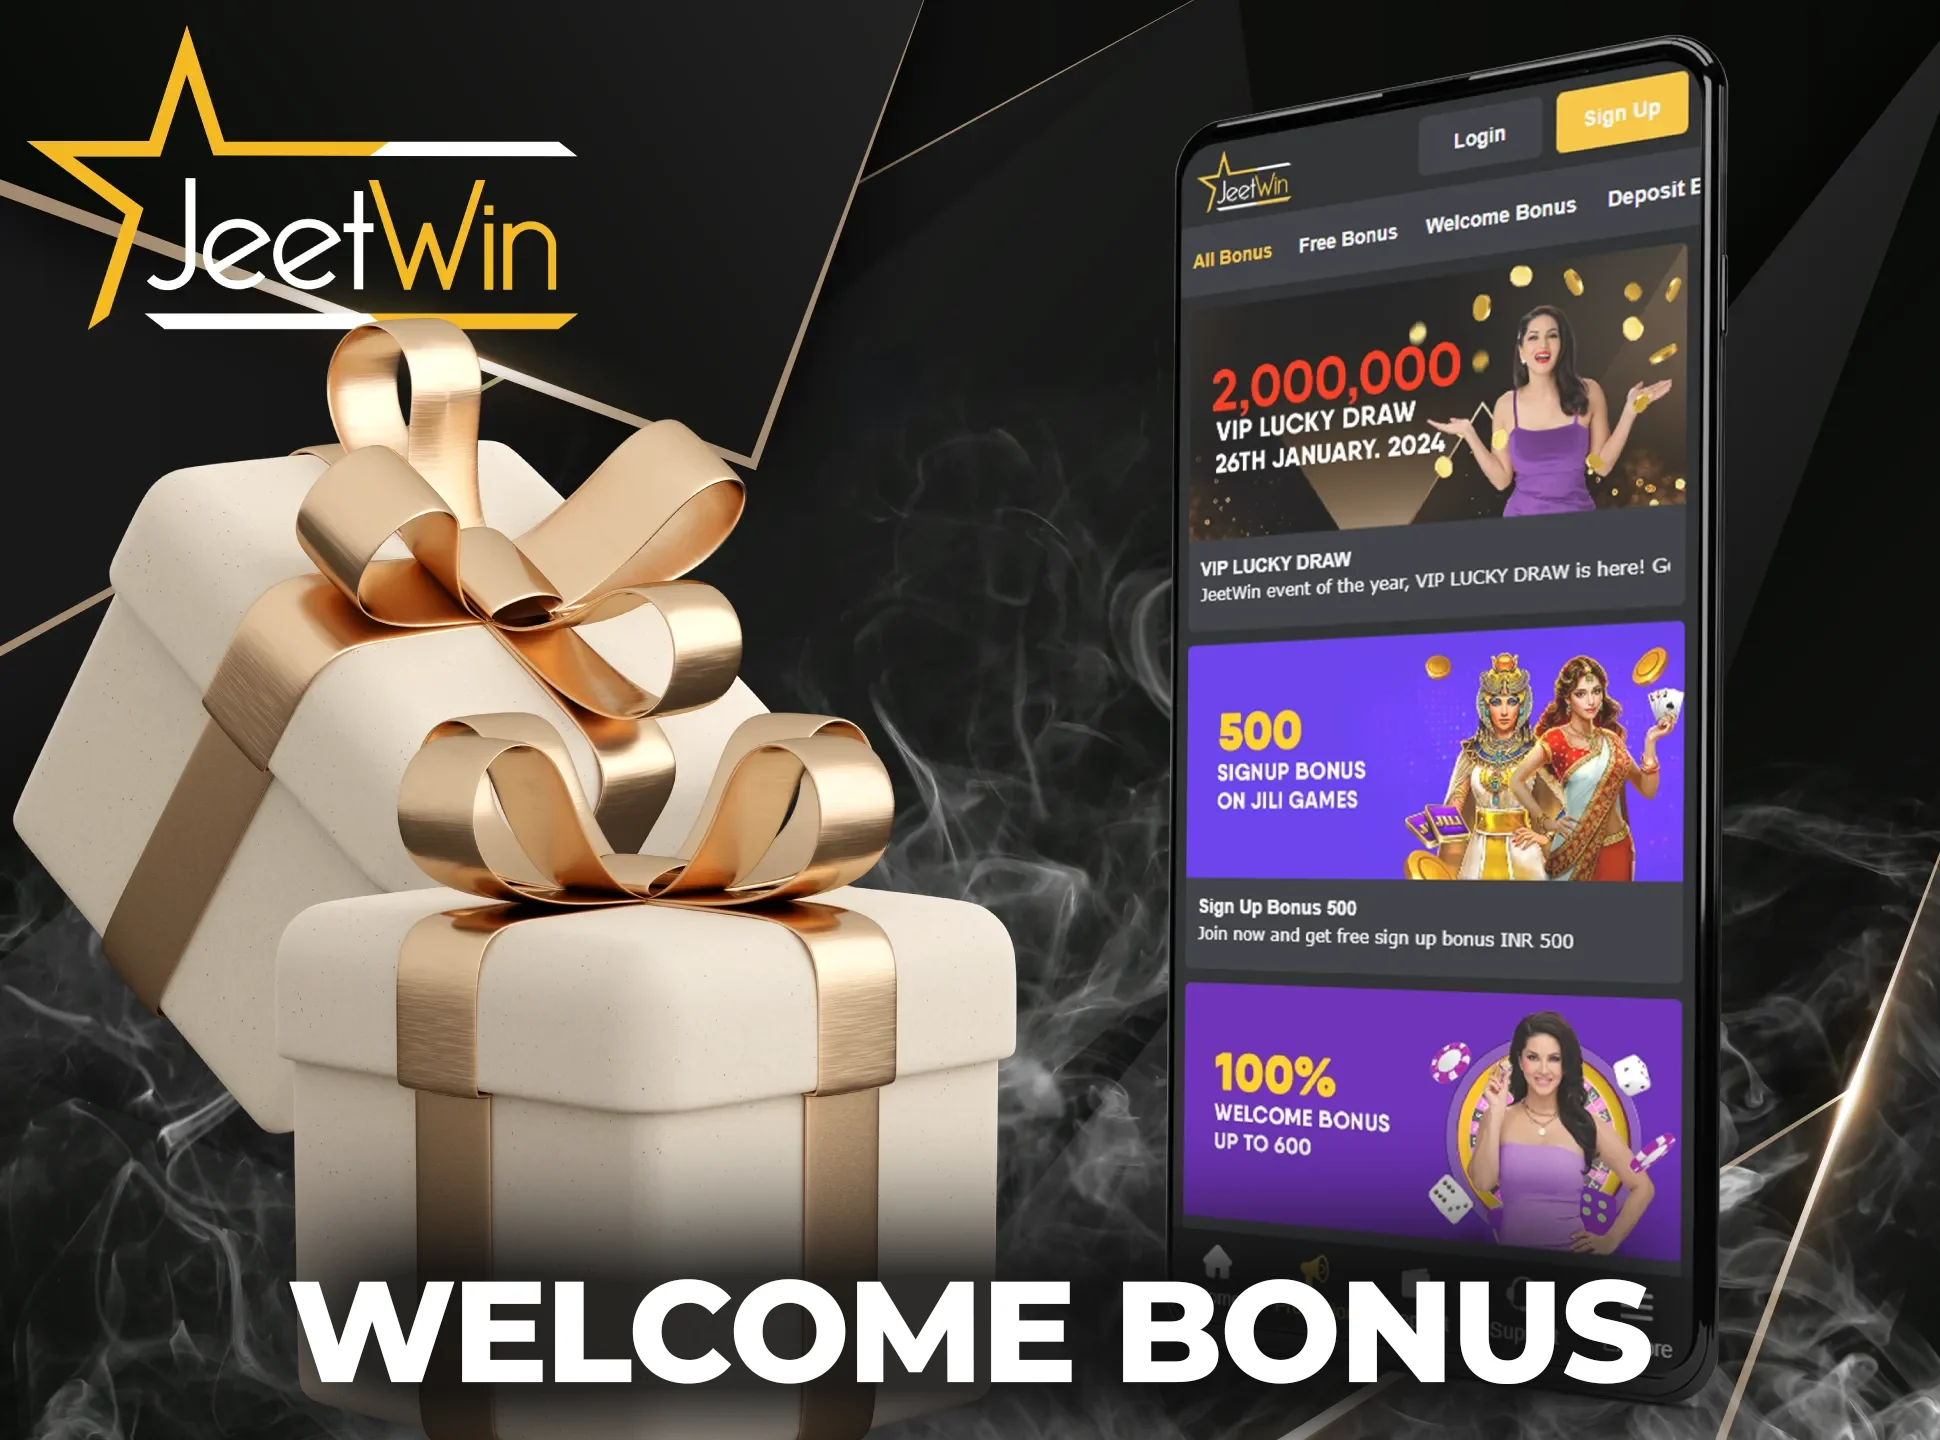 Sign up on the JeetWin app and get a welcome bonus.